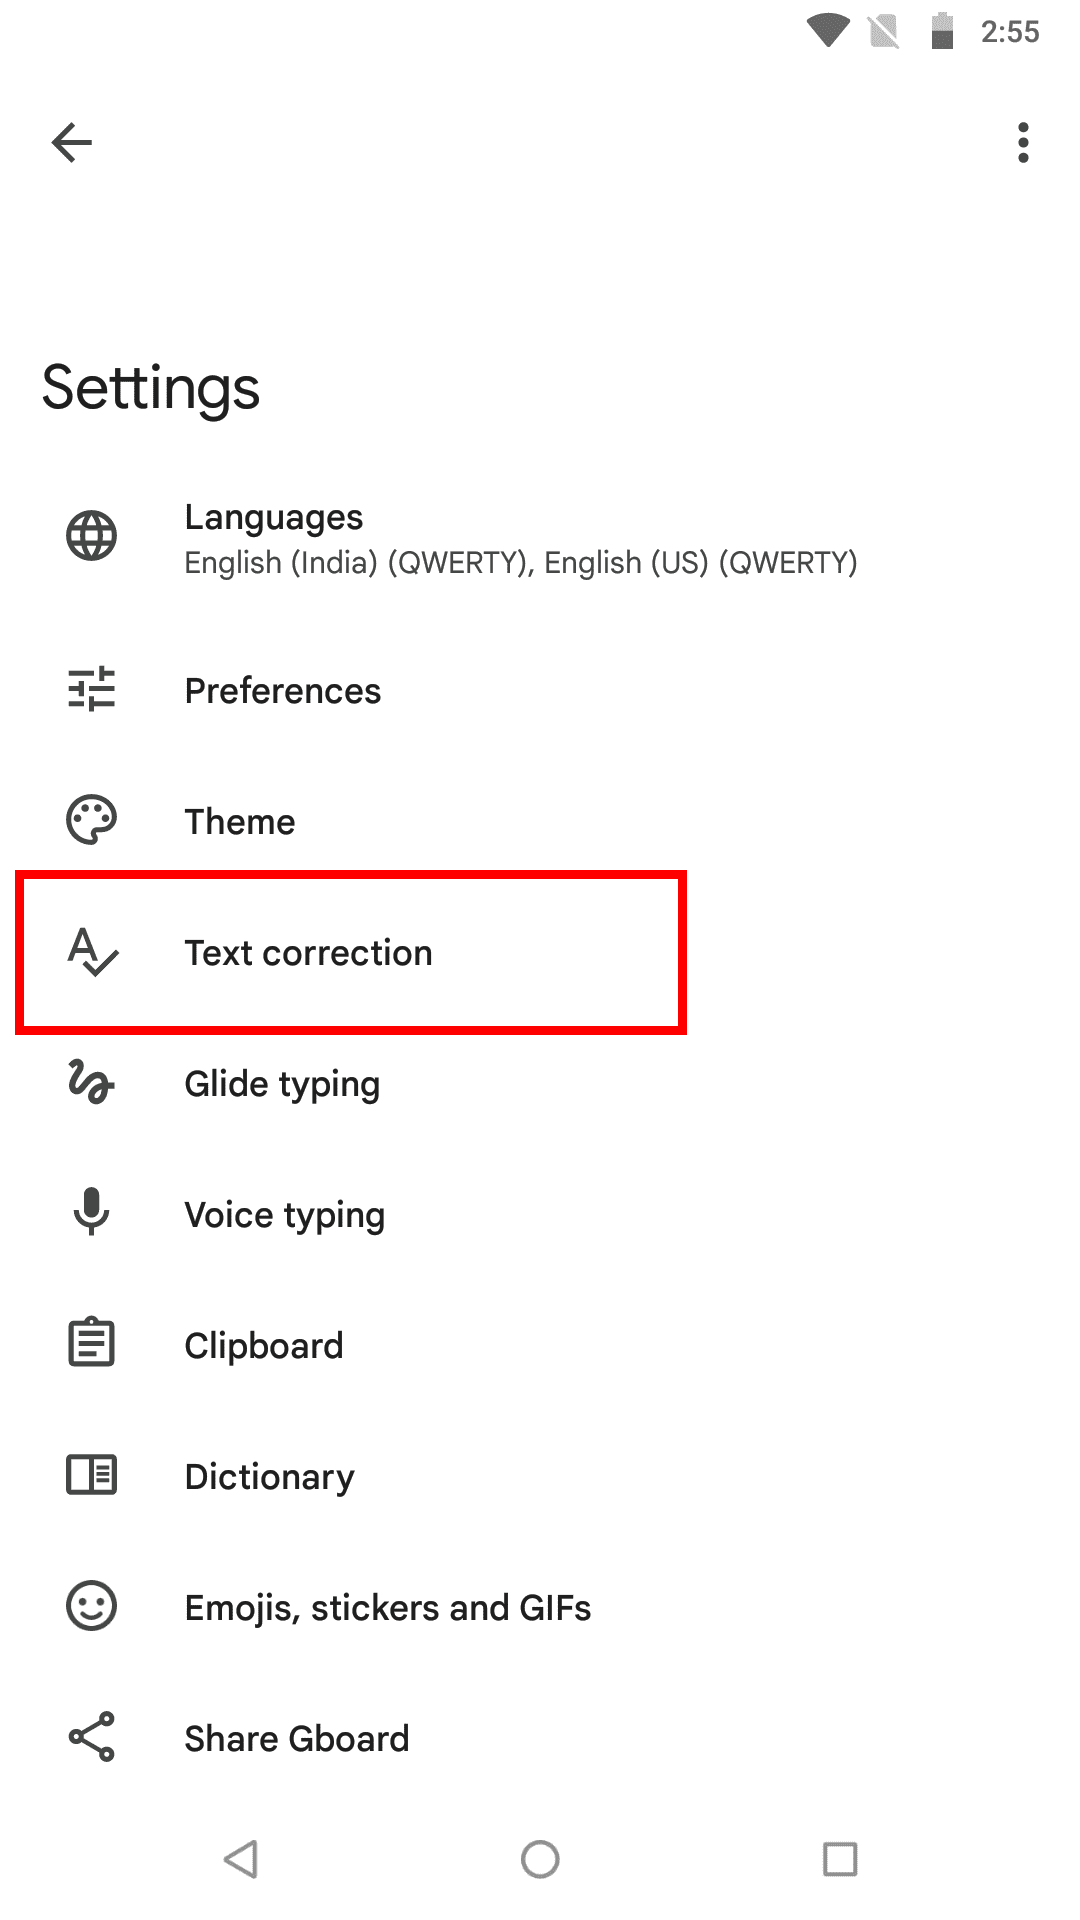 Tap gear icon to access Gboard settings